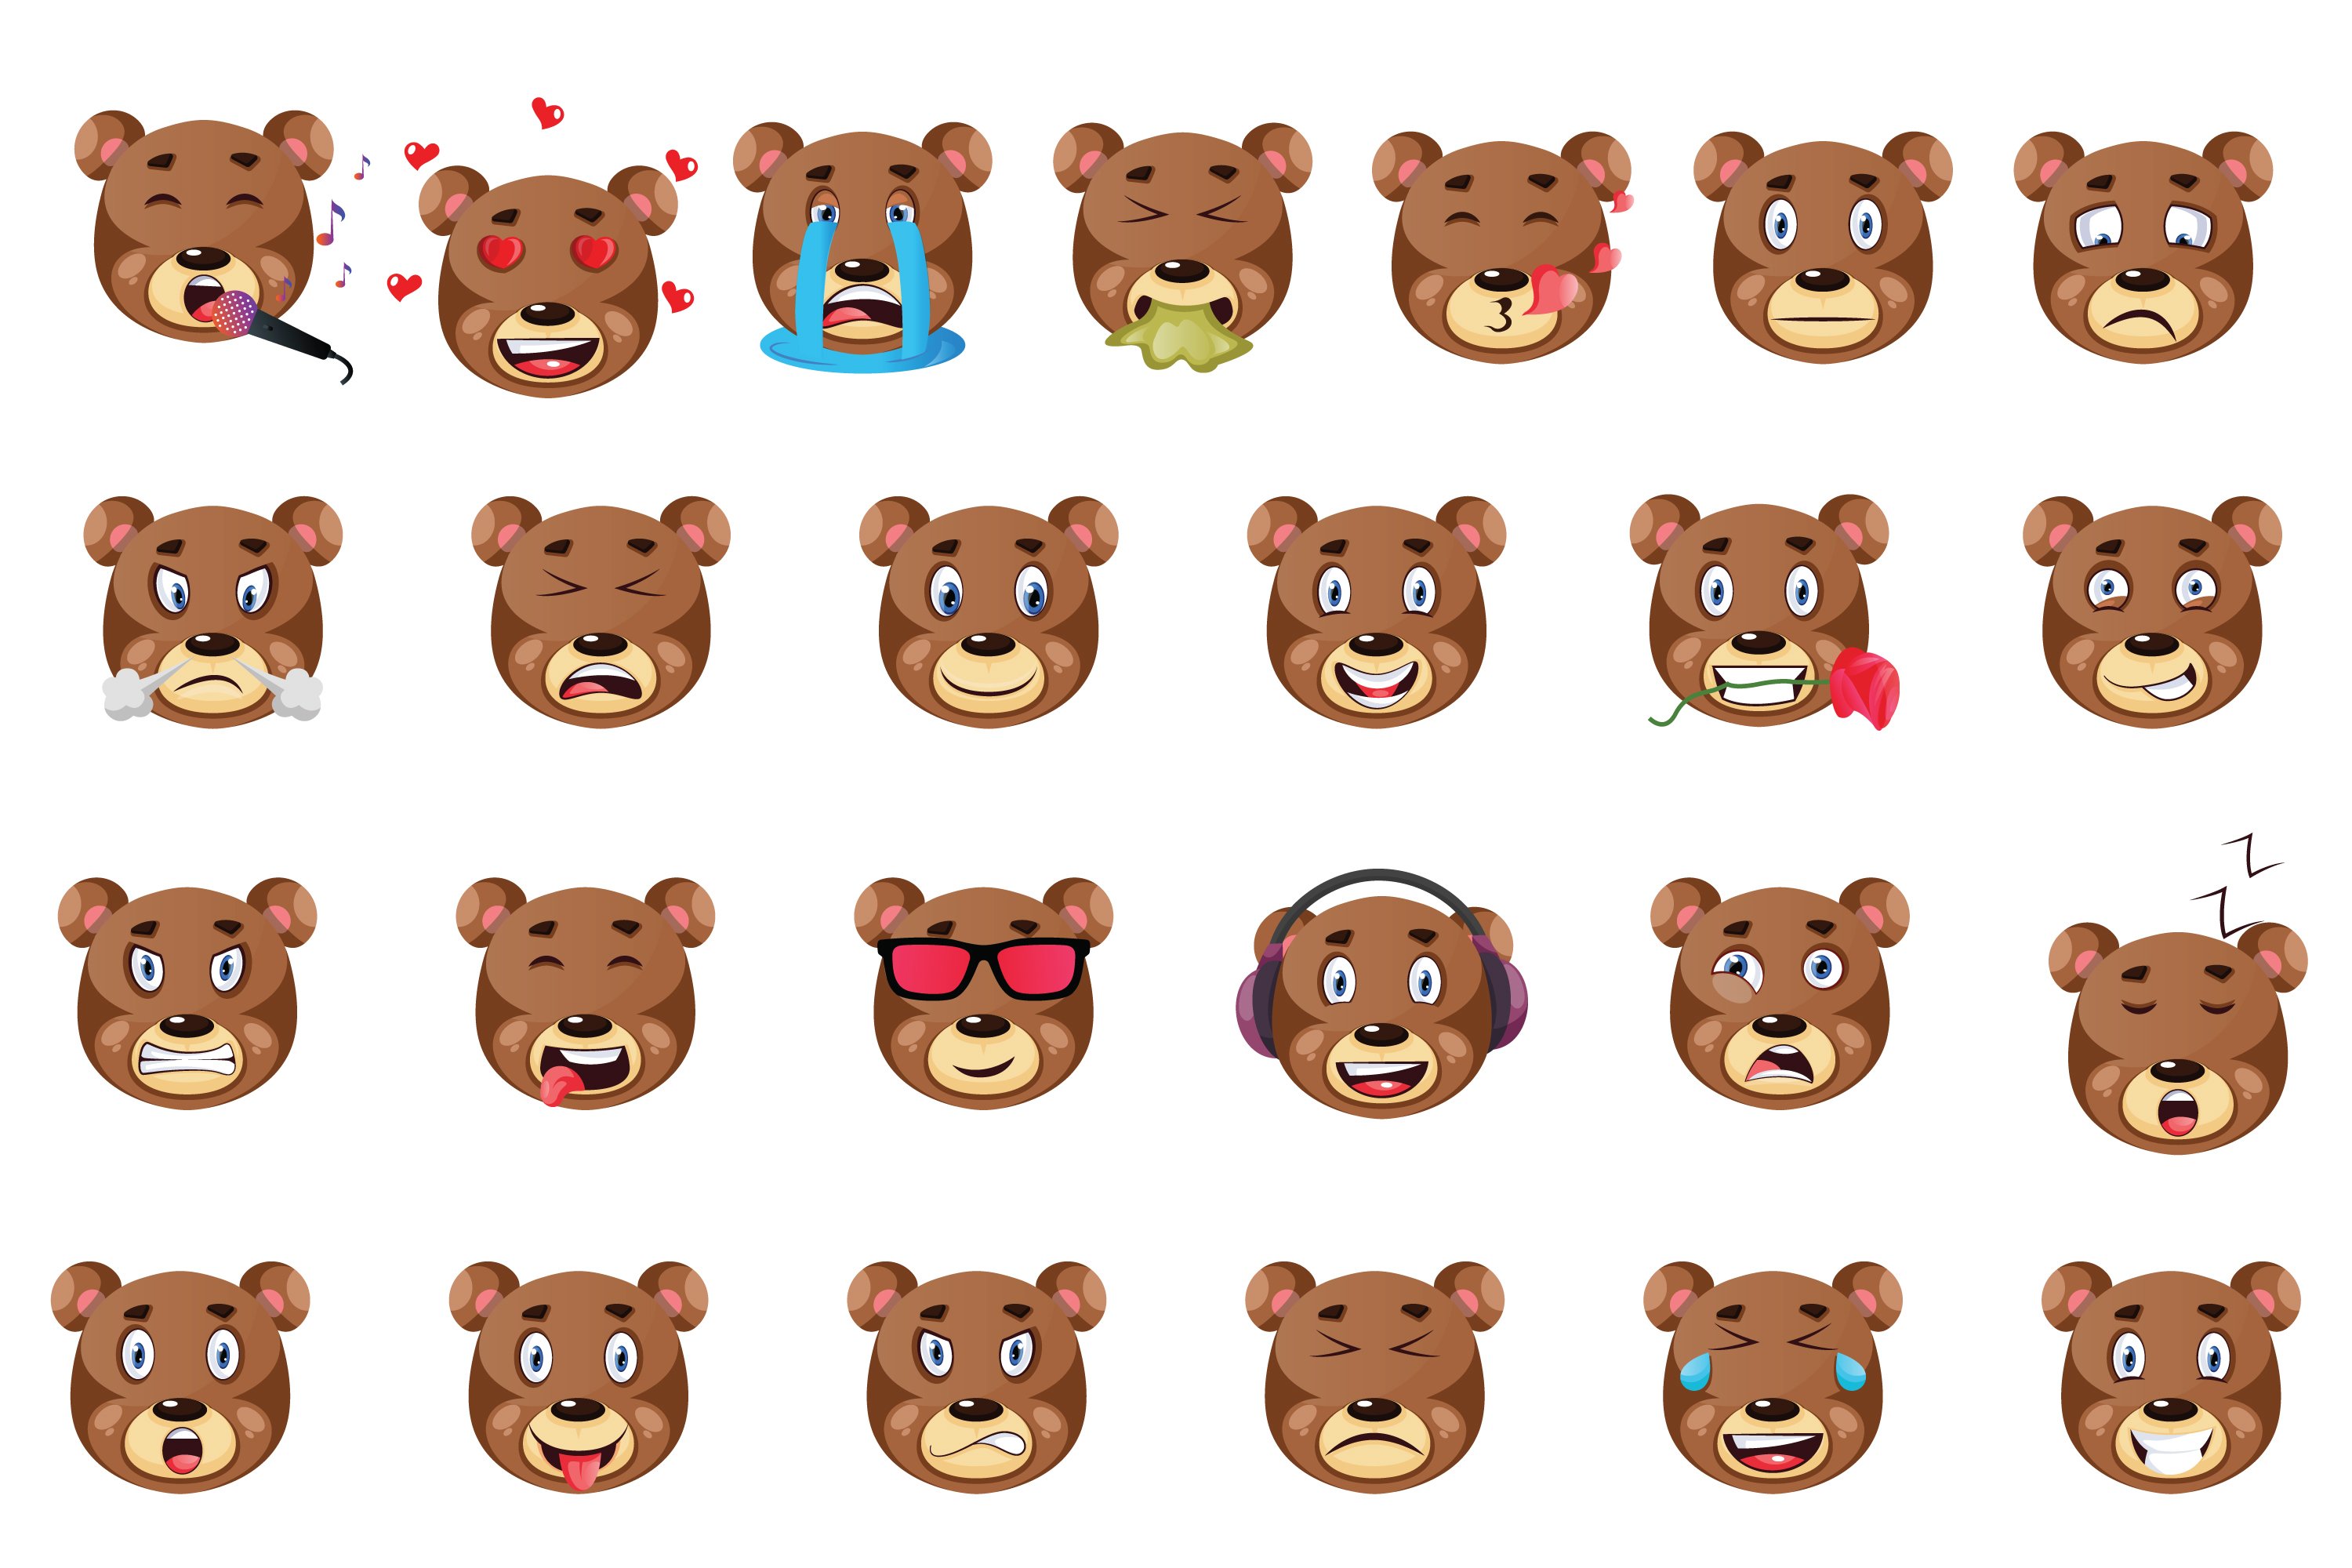 Collection of colorful images of bear face emoticons.